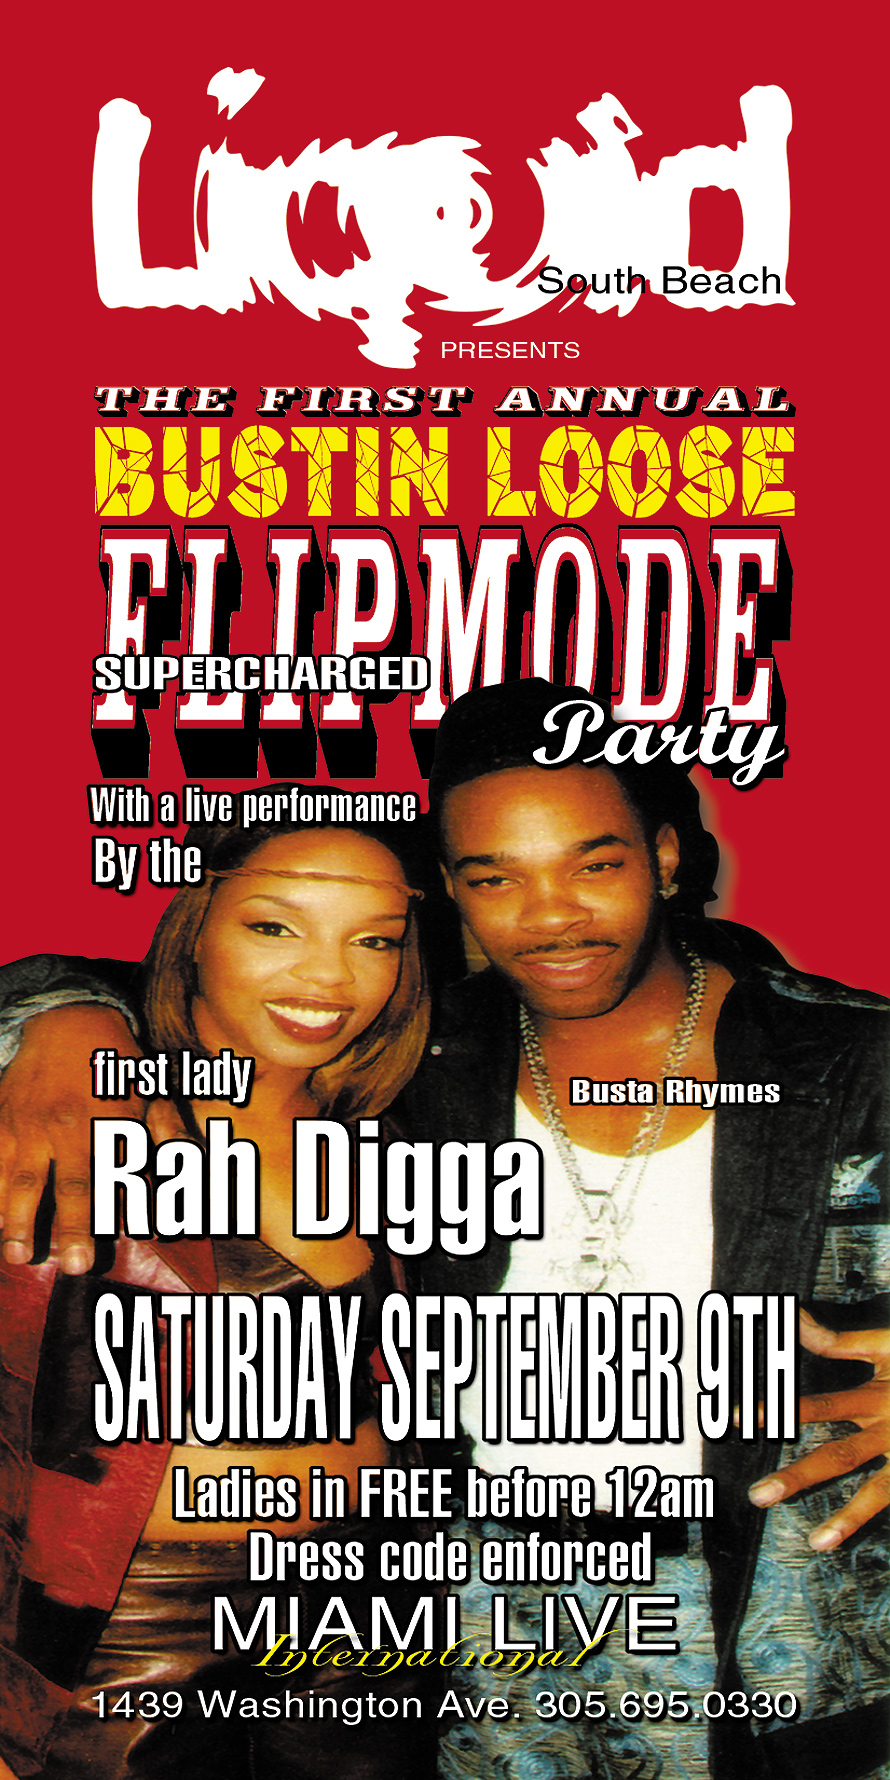 Busting Loose Flipmode Squad Party at Liquid